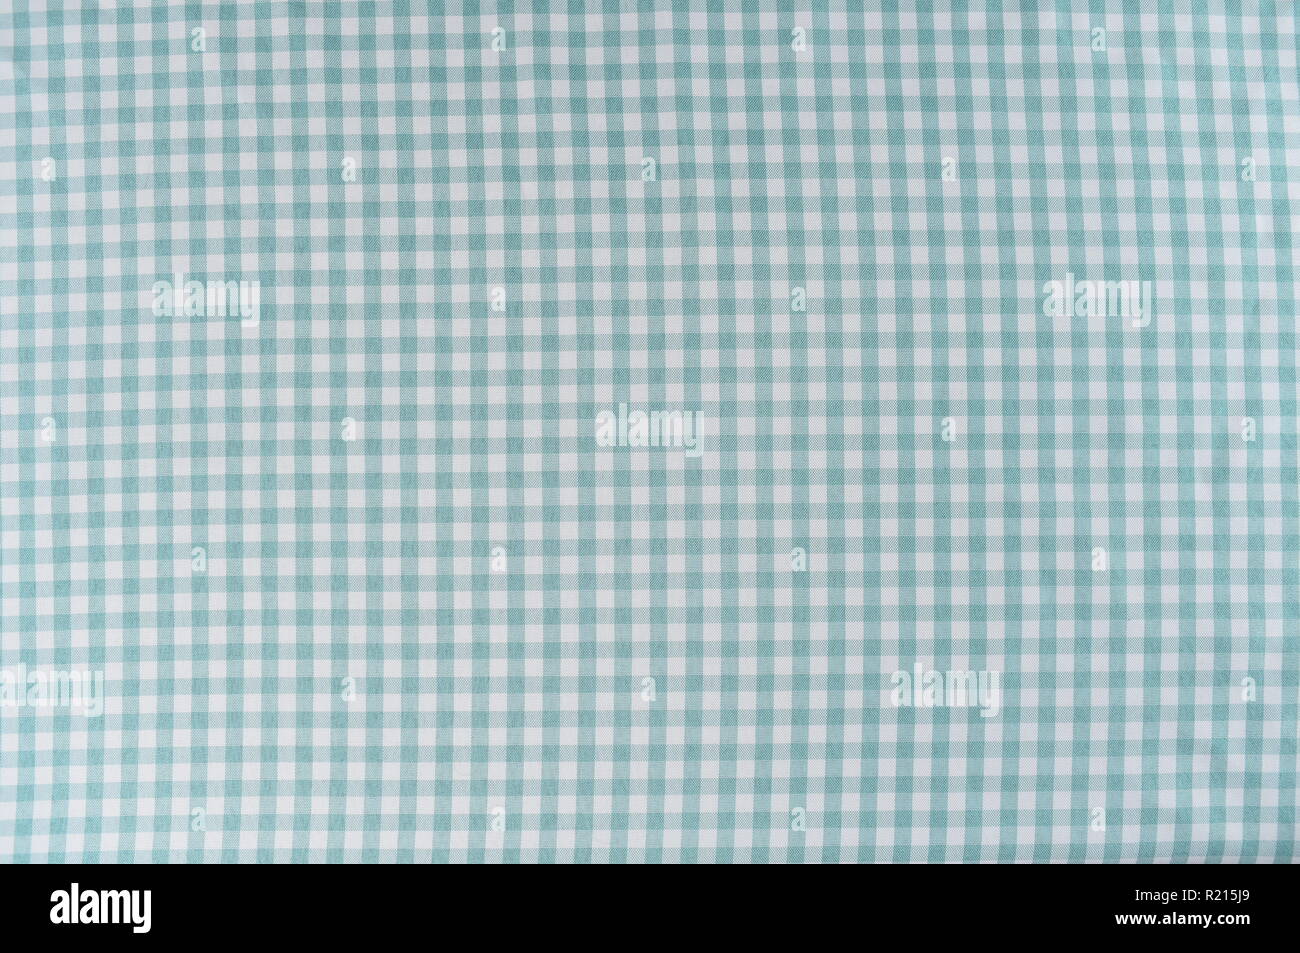 Mint and white is the checkered pattern on a tablecloth. The fabric is woven and is wrinkle free. Stock Photo